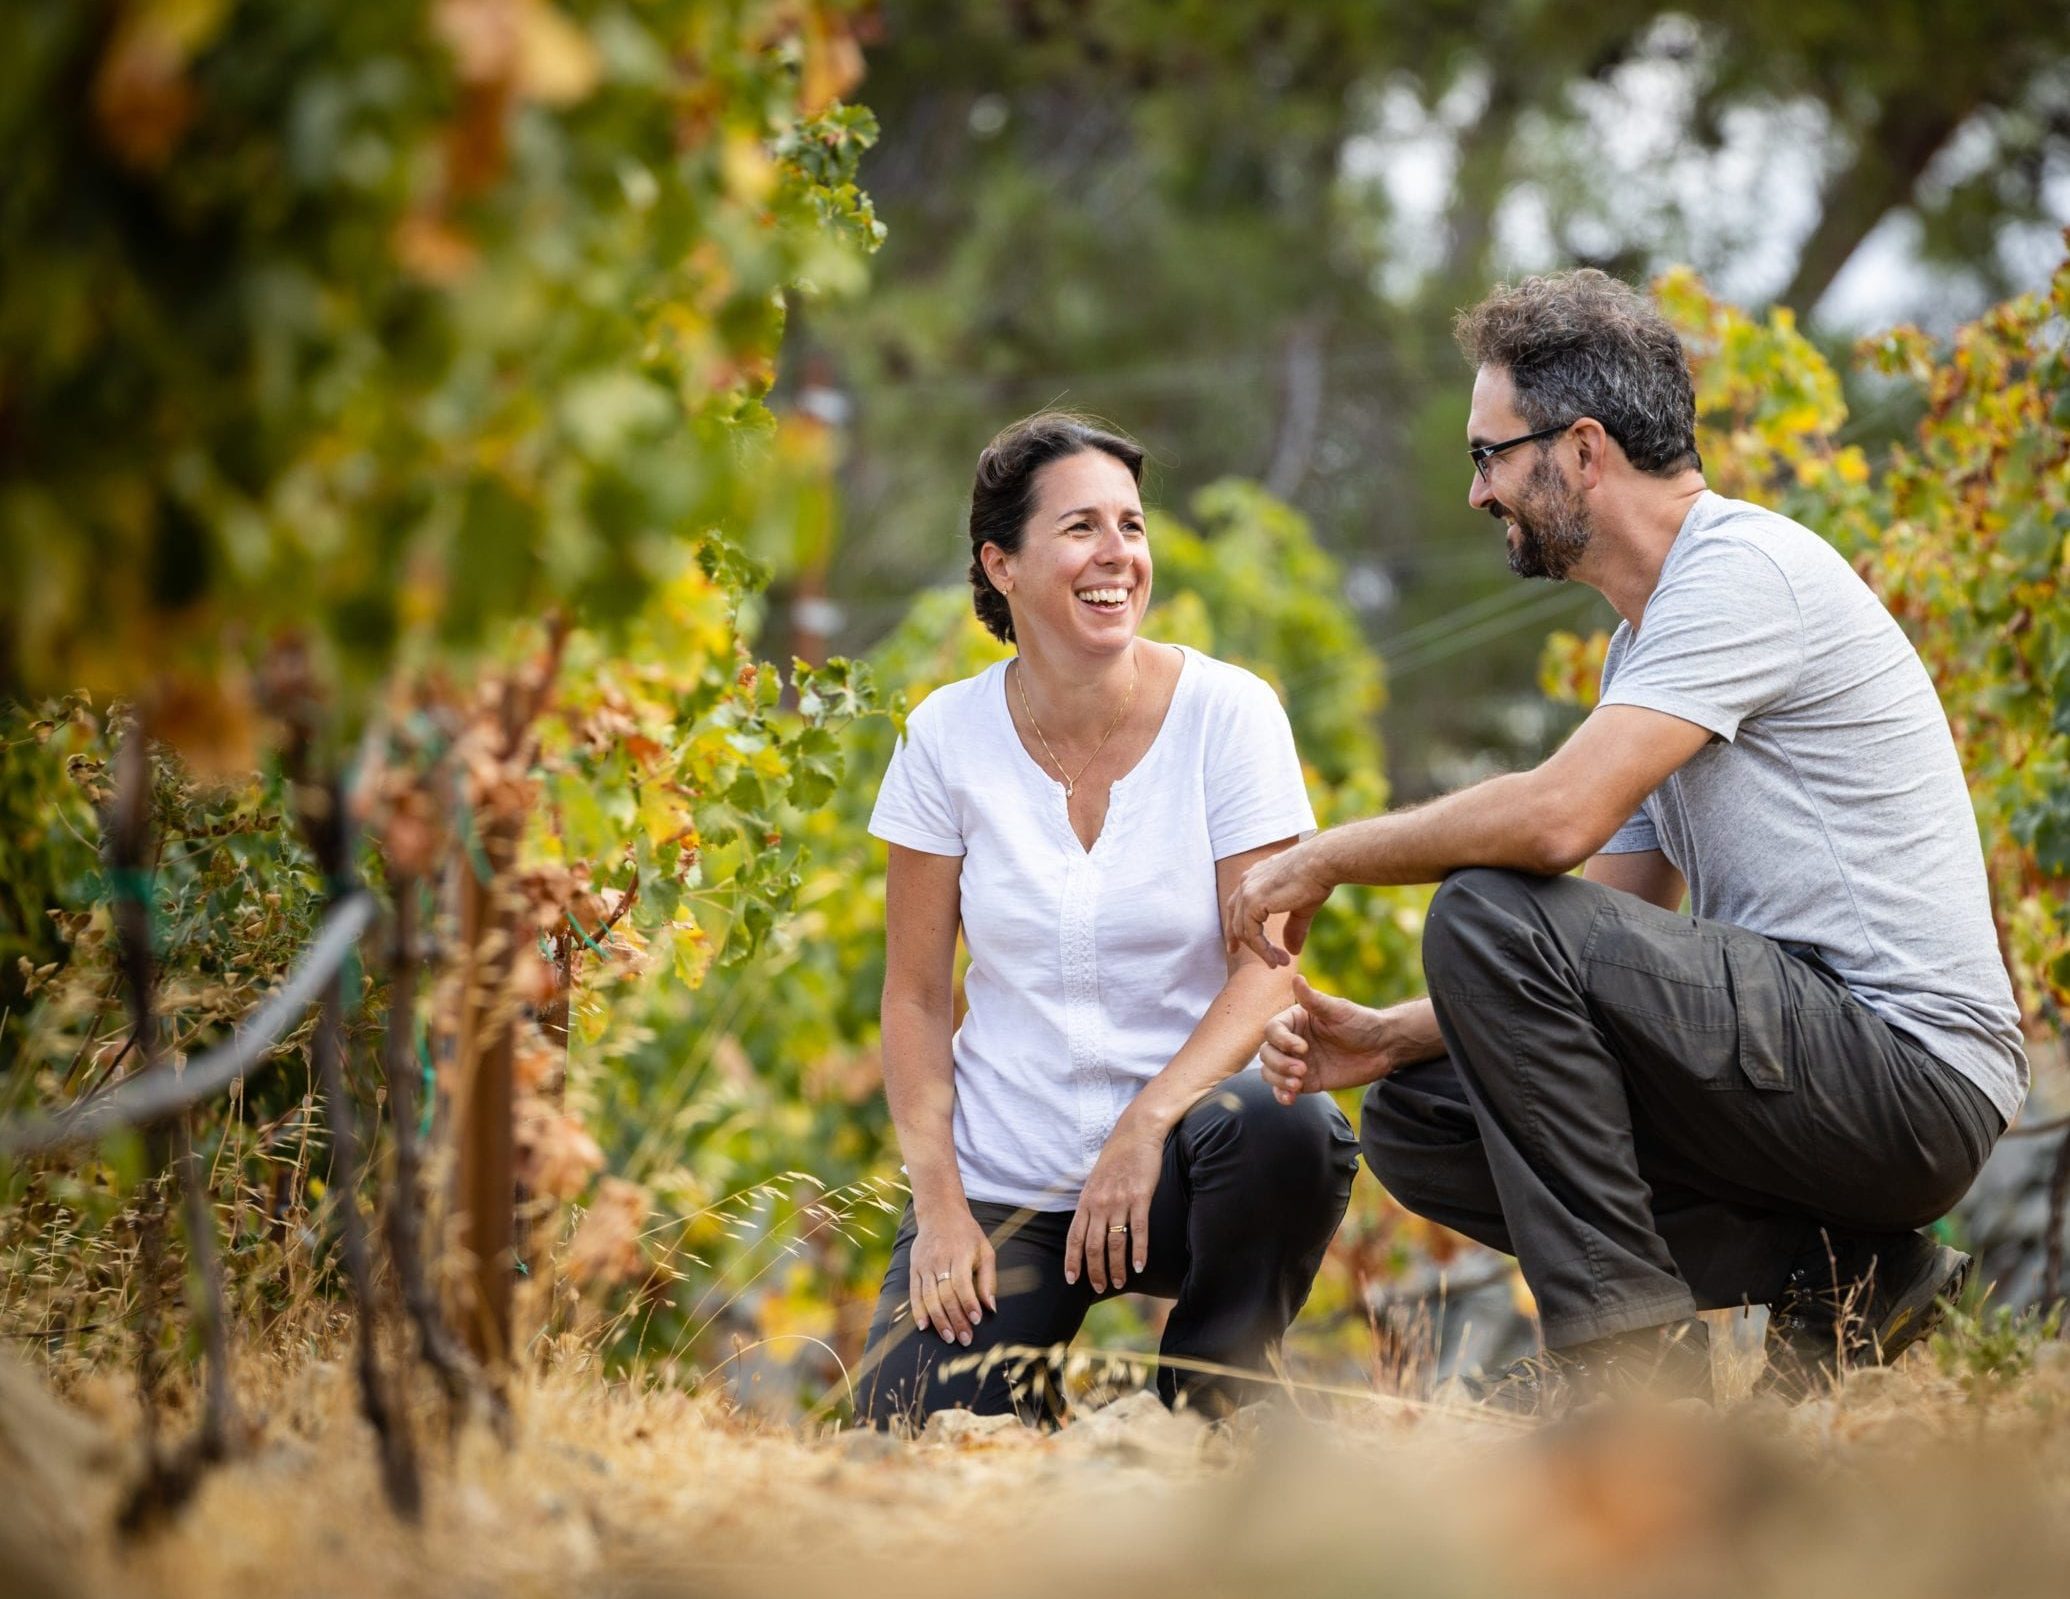 Victoras Finopoulos and Alexa Papadouris in the vineyards of Marathasa smiling and land